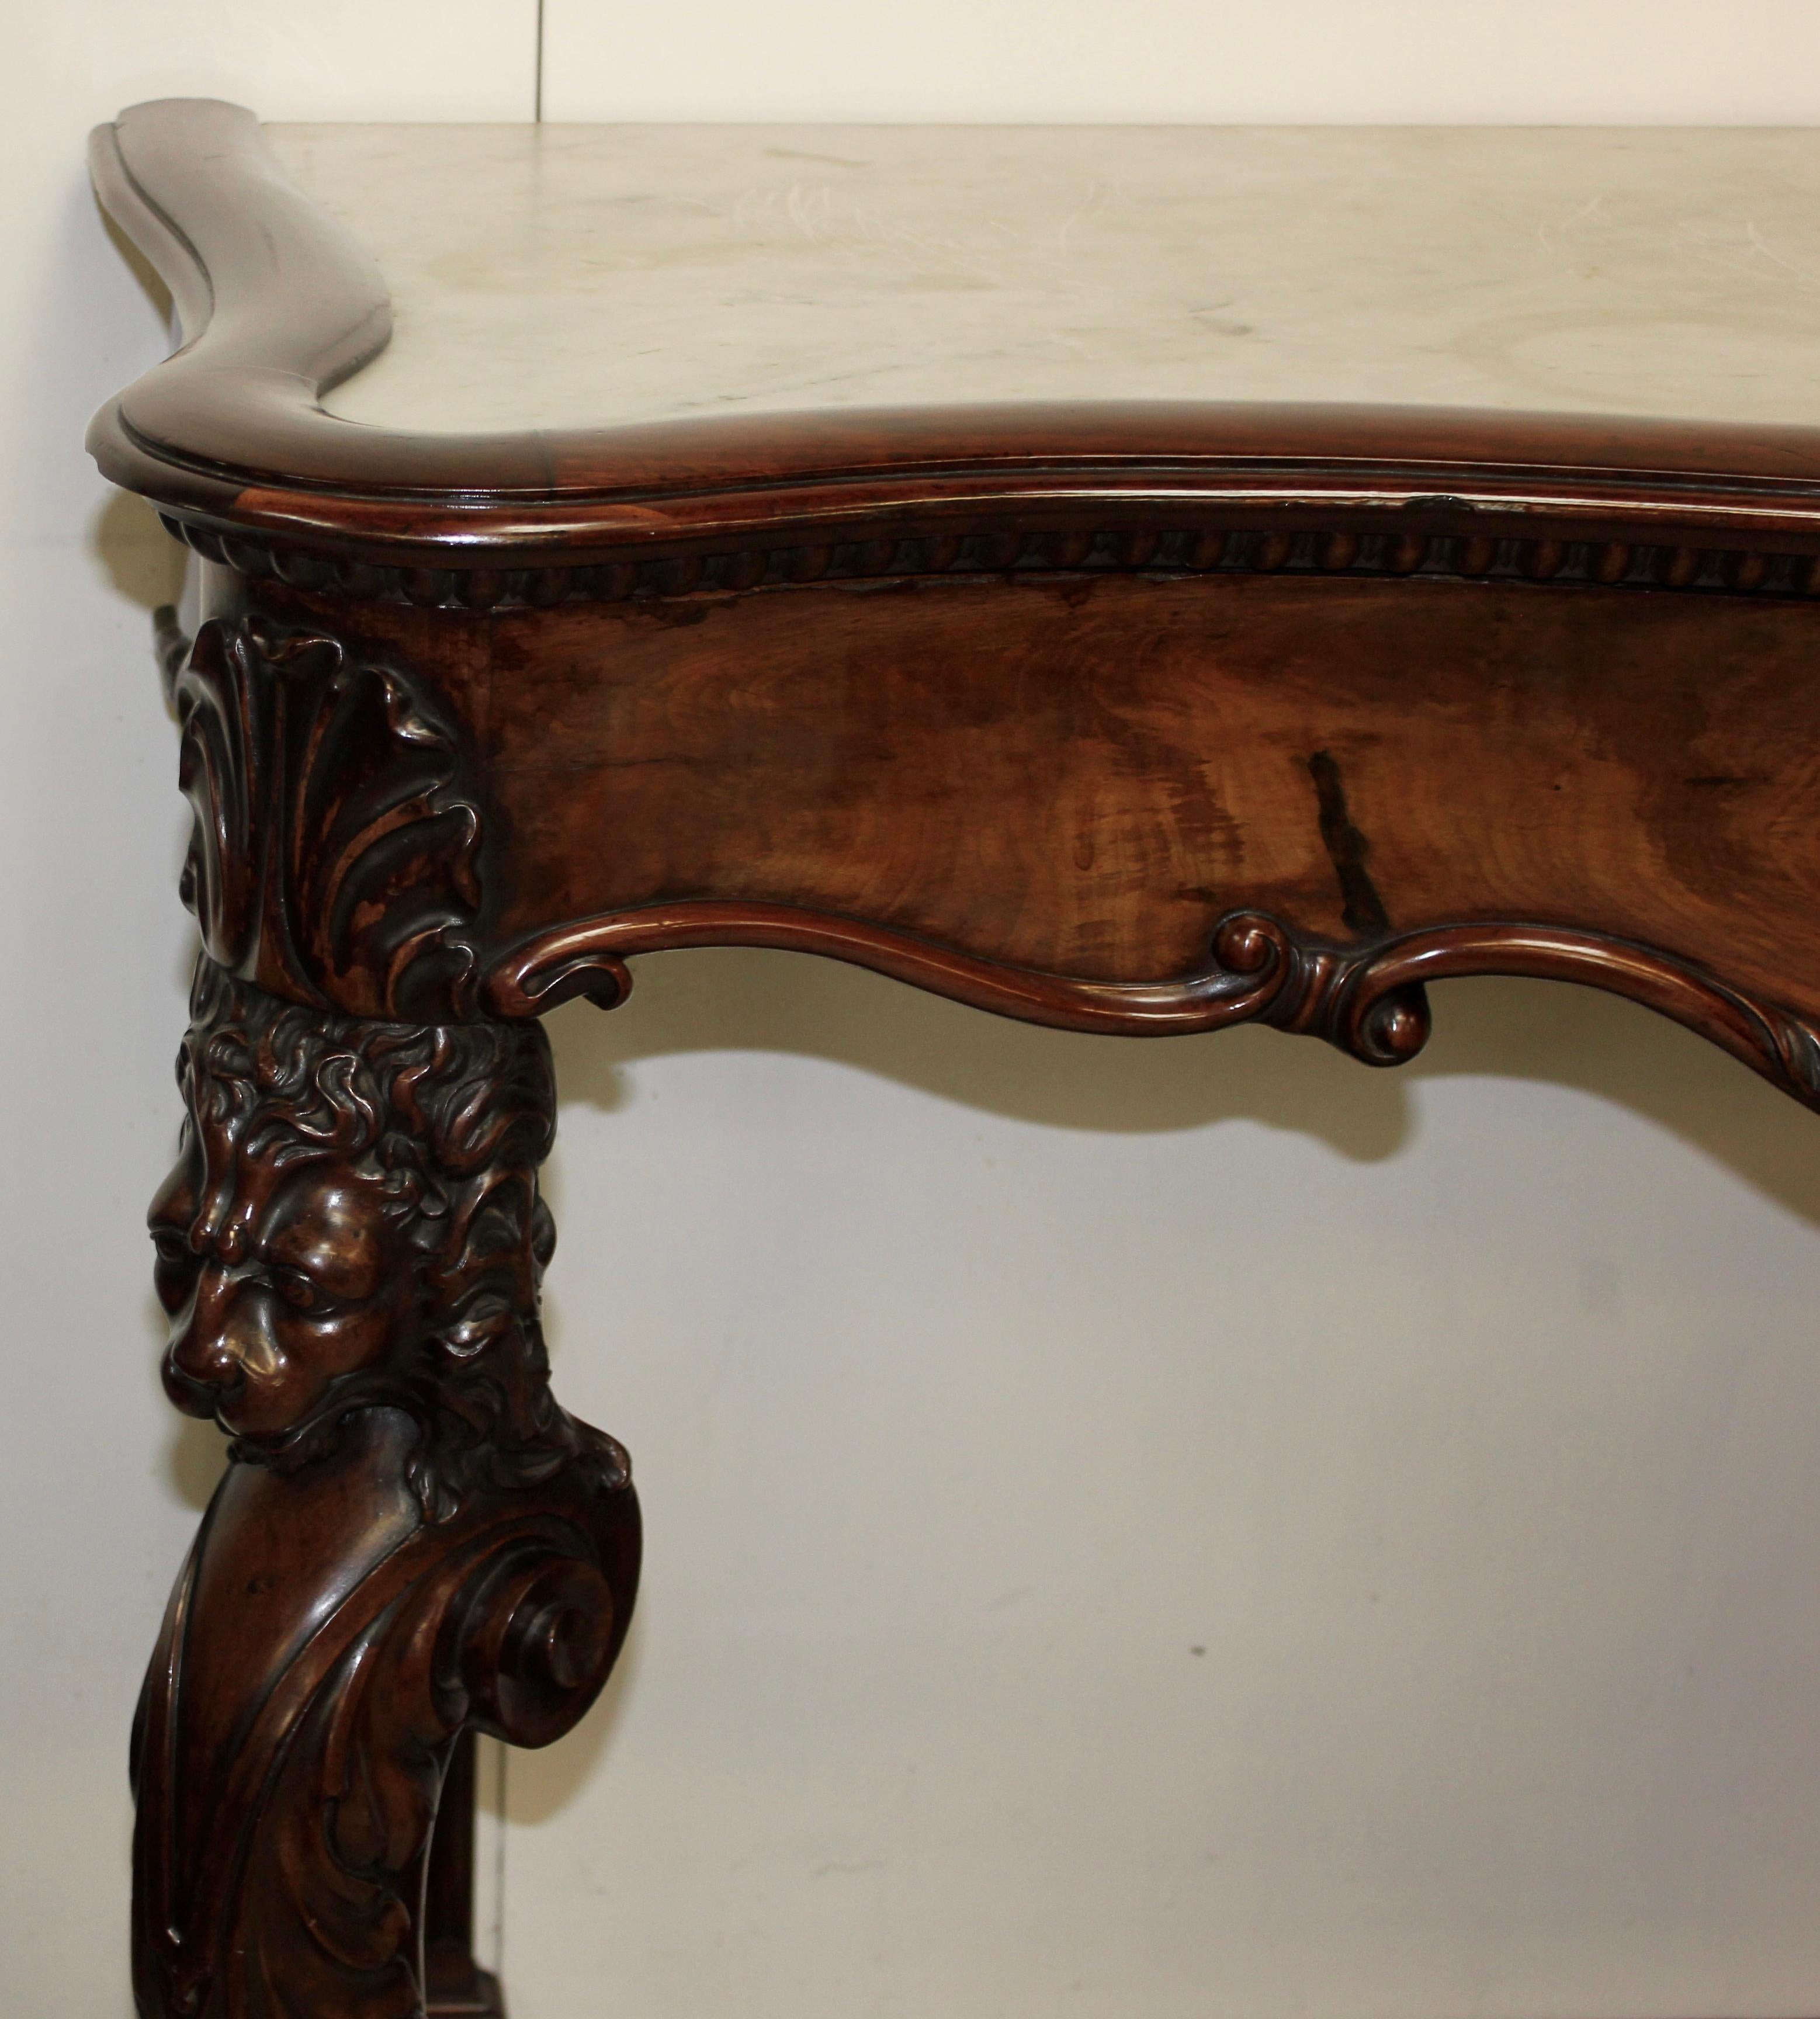 Wonderful large mahogany console table, possibly Irish, it's got great quality timber everywhere on this console table. Lots of detailing and wonderful ball and claw feet with masks and lovely fluting to the back pillars.